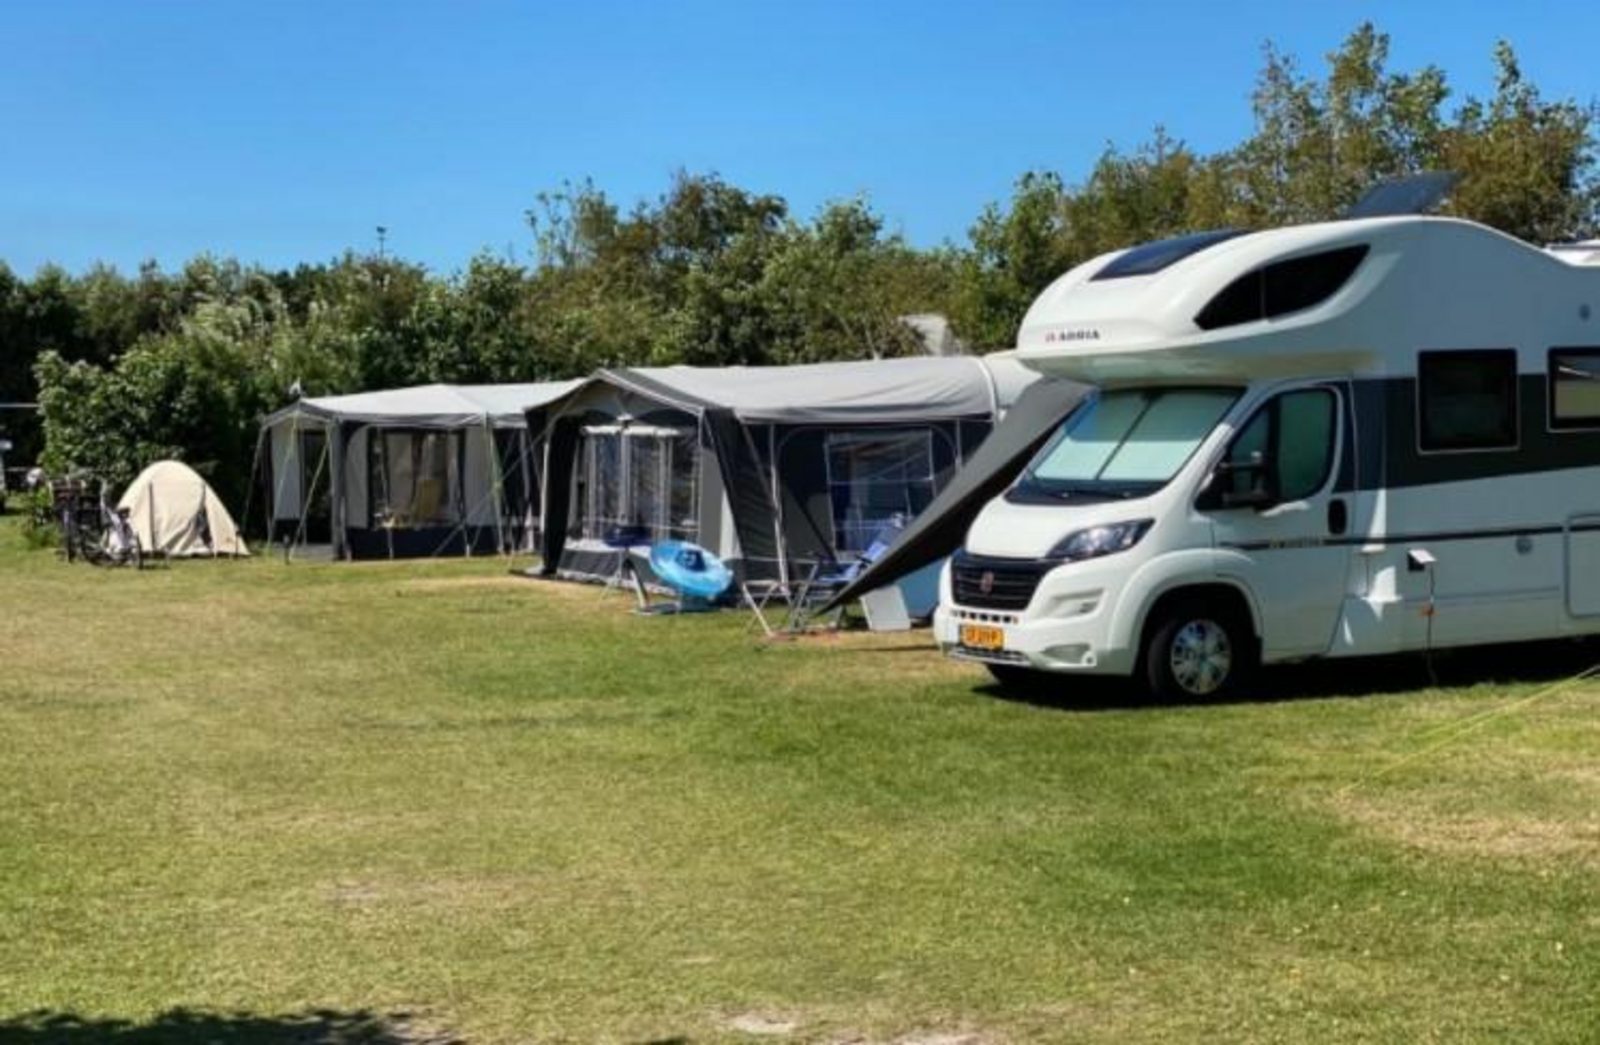 Camping Luxus